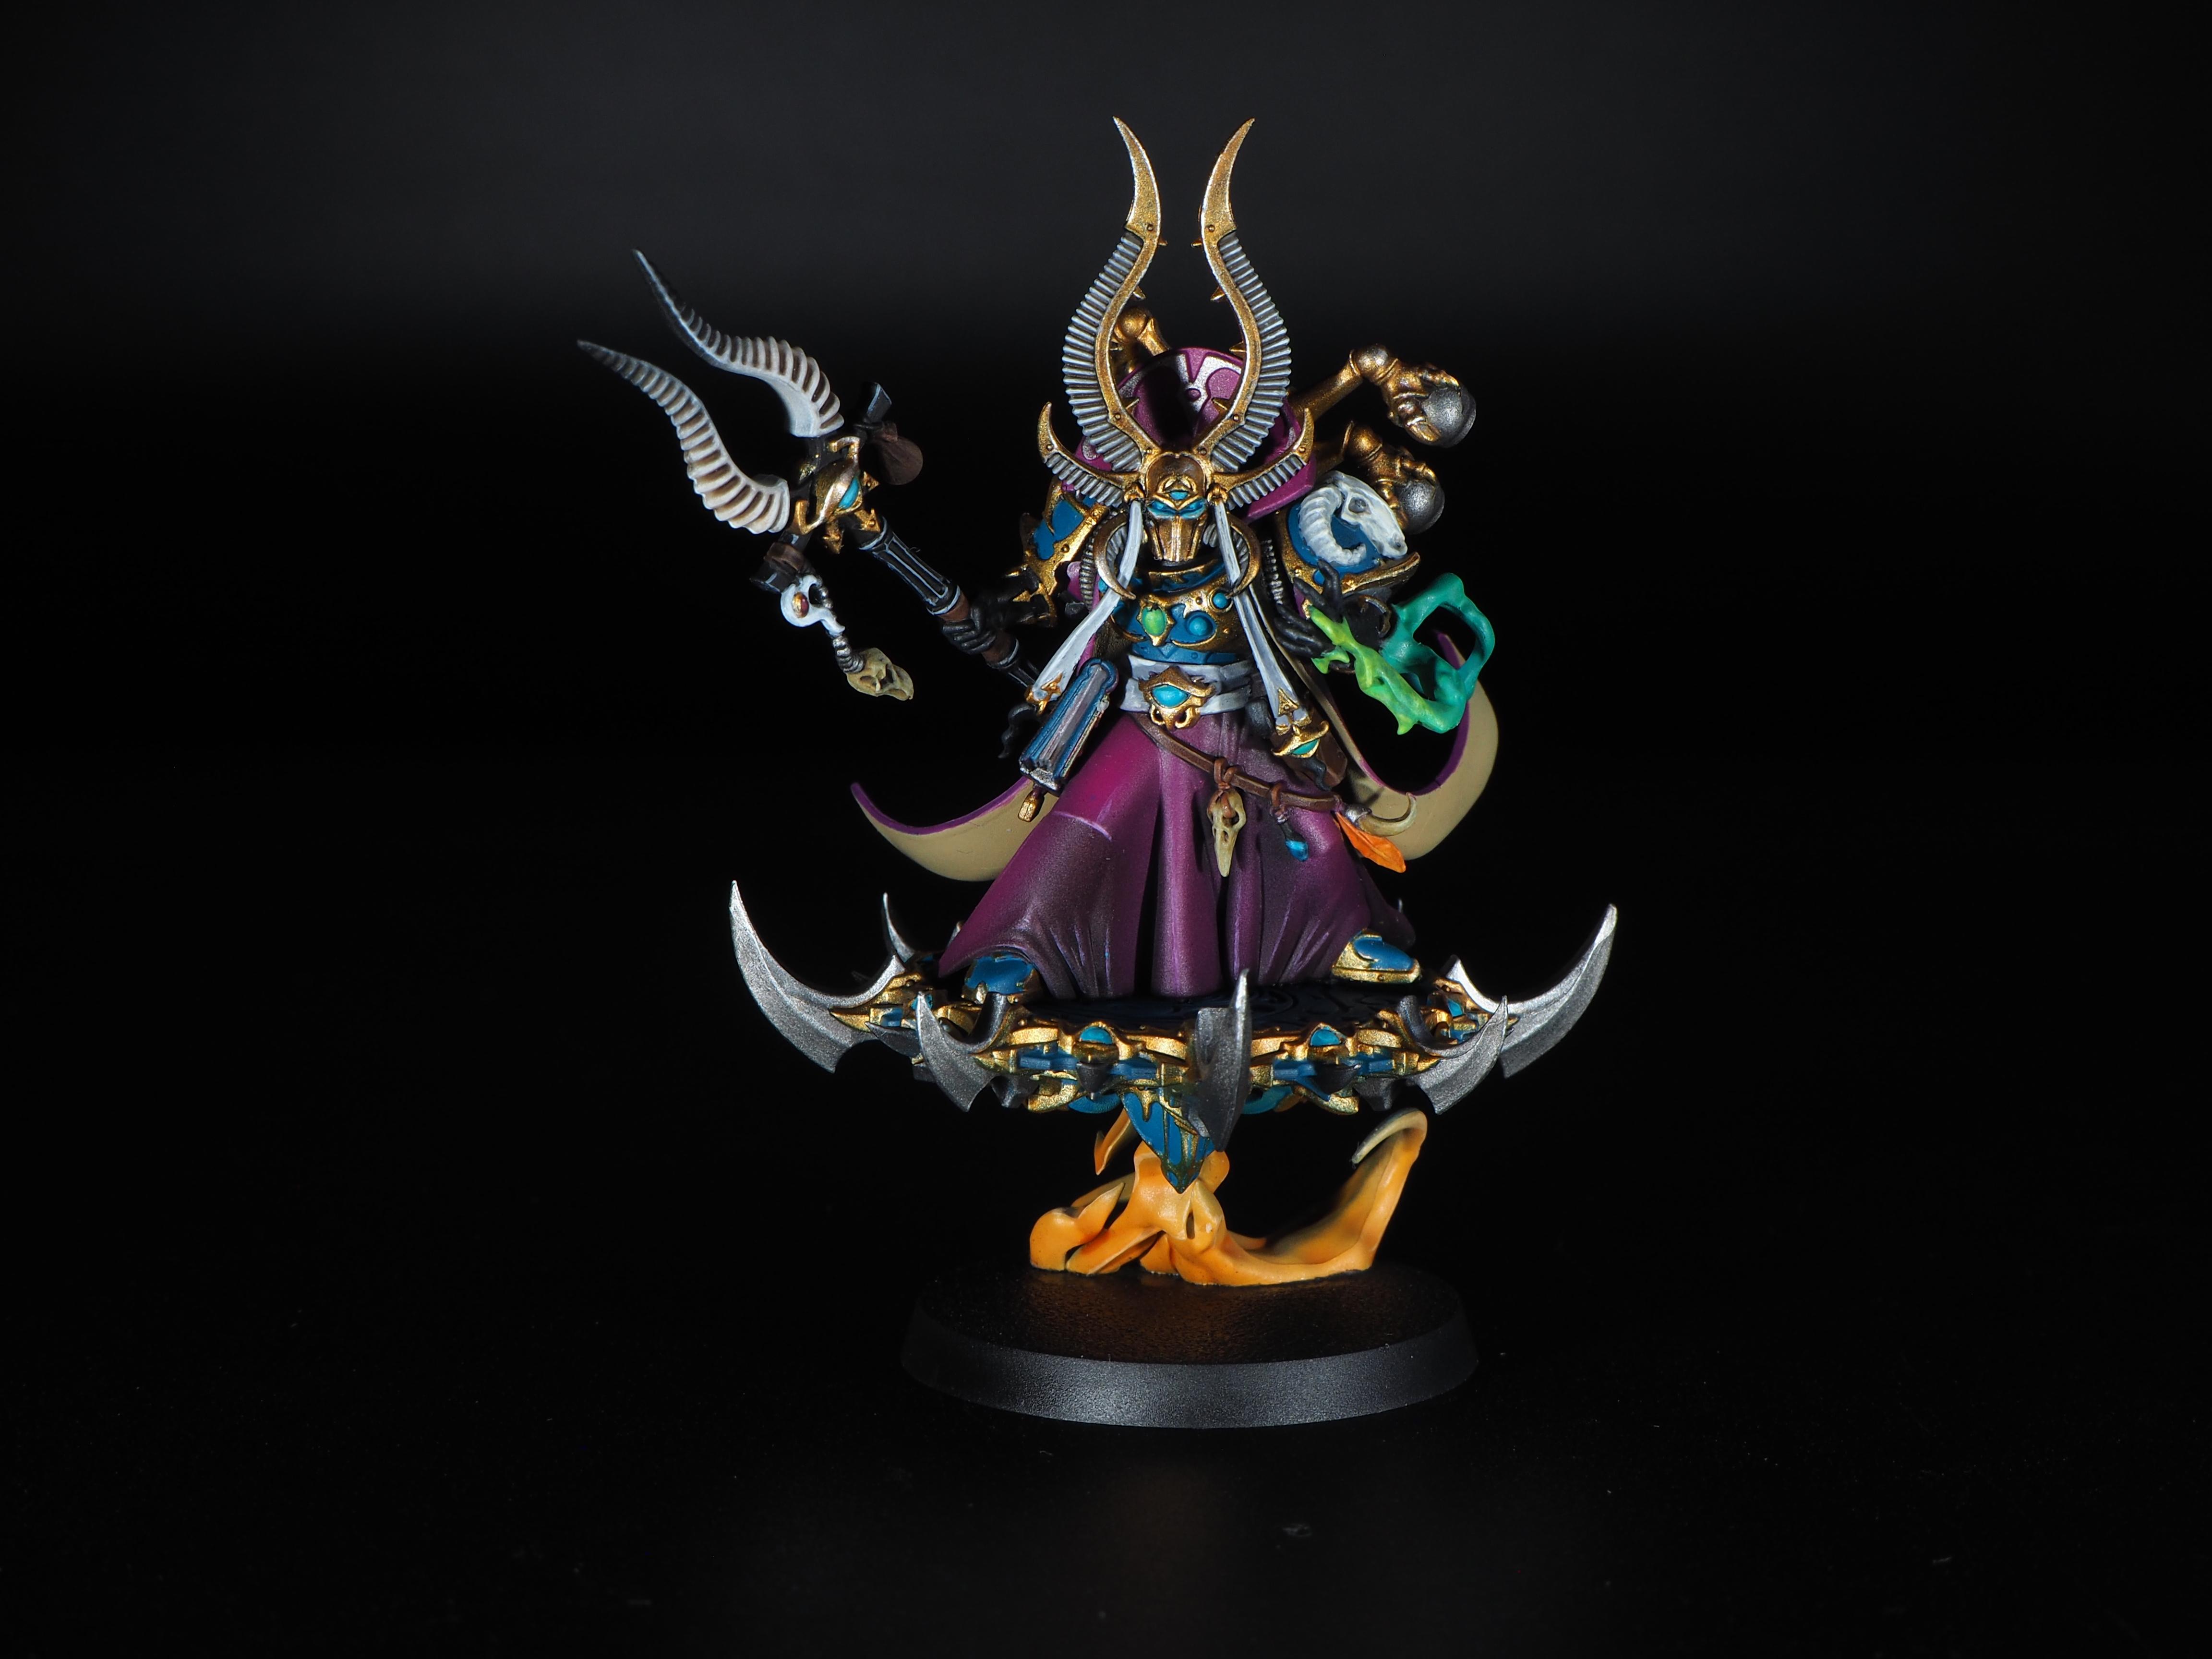 Ahriman, Chaos, Chaos Space Marines, Commissiofantasypainters, Thousand Sons, Tzeench, Warhammer 40,000, Warhammer Fantasy